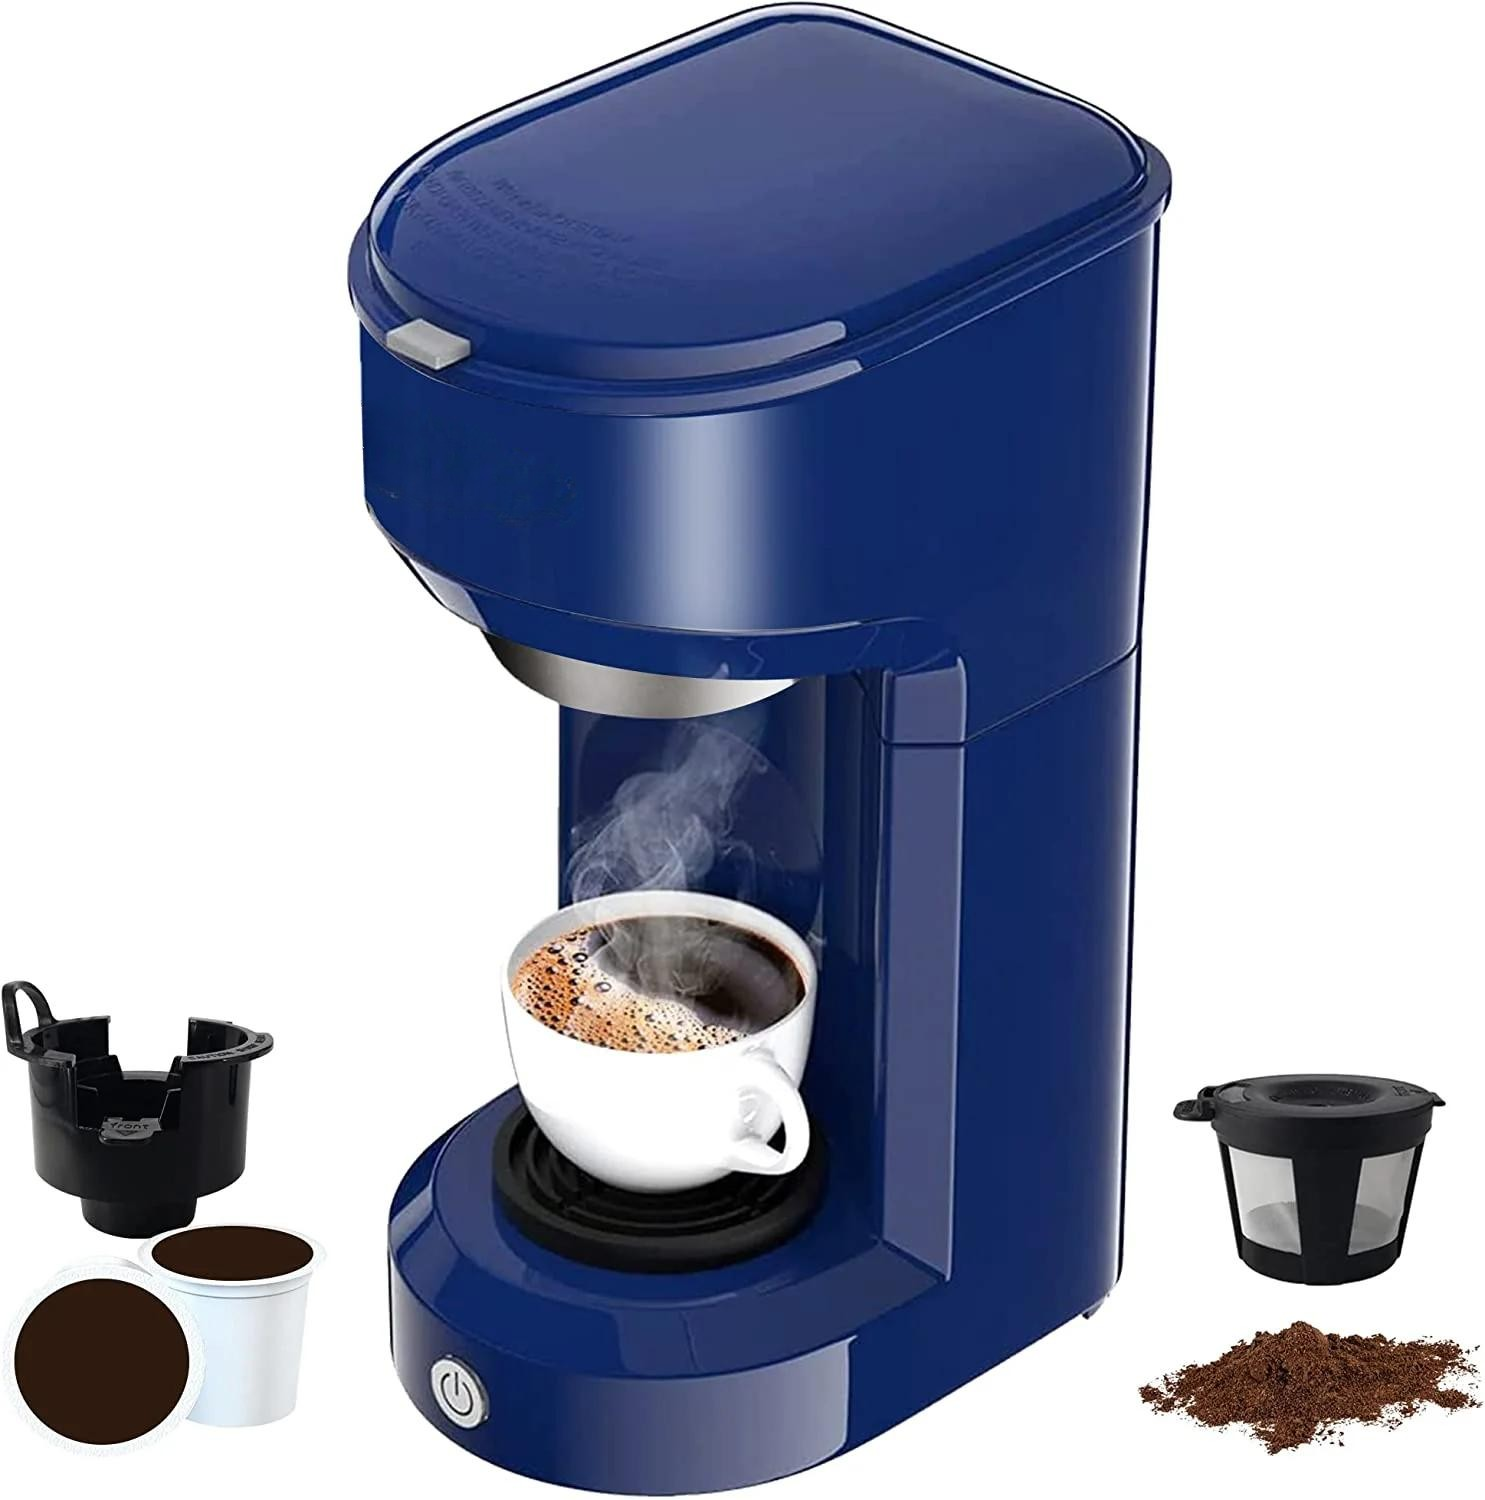 2 in 1 Single Serve Coffee Maker for K Cup Pods & Ground Coffee, Mini K Cup  Coffee Machine with 6 to 14 oz Brew Sizes, Single Cup Coffee Brewer with